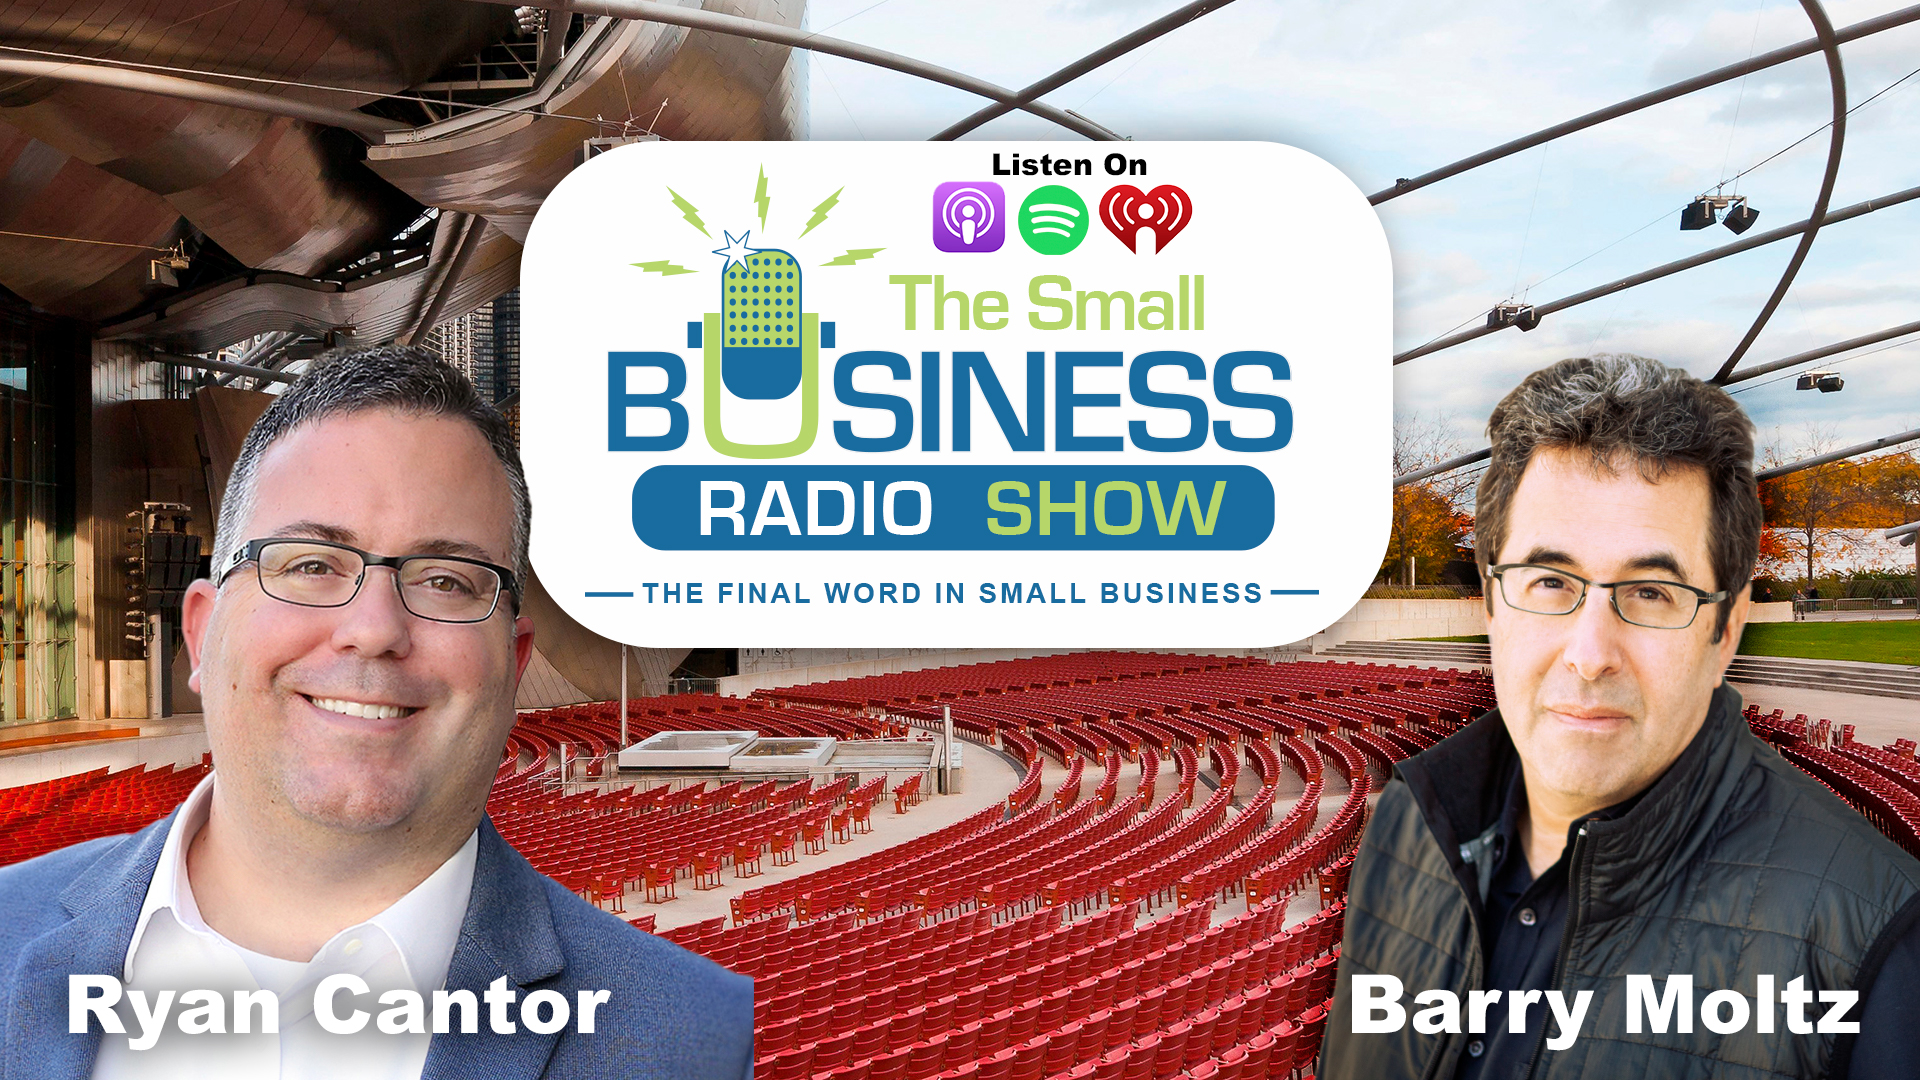 Ryan Cantor on The Small Business Radio Show